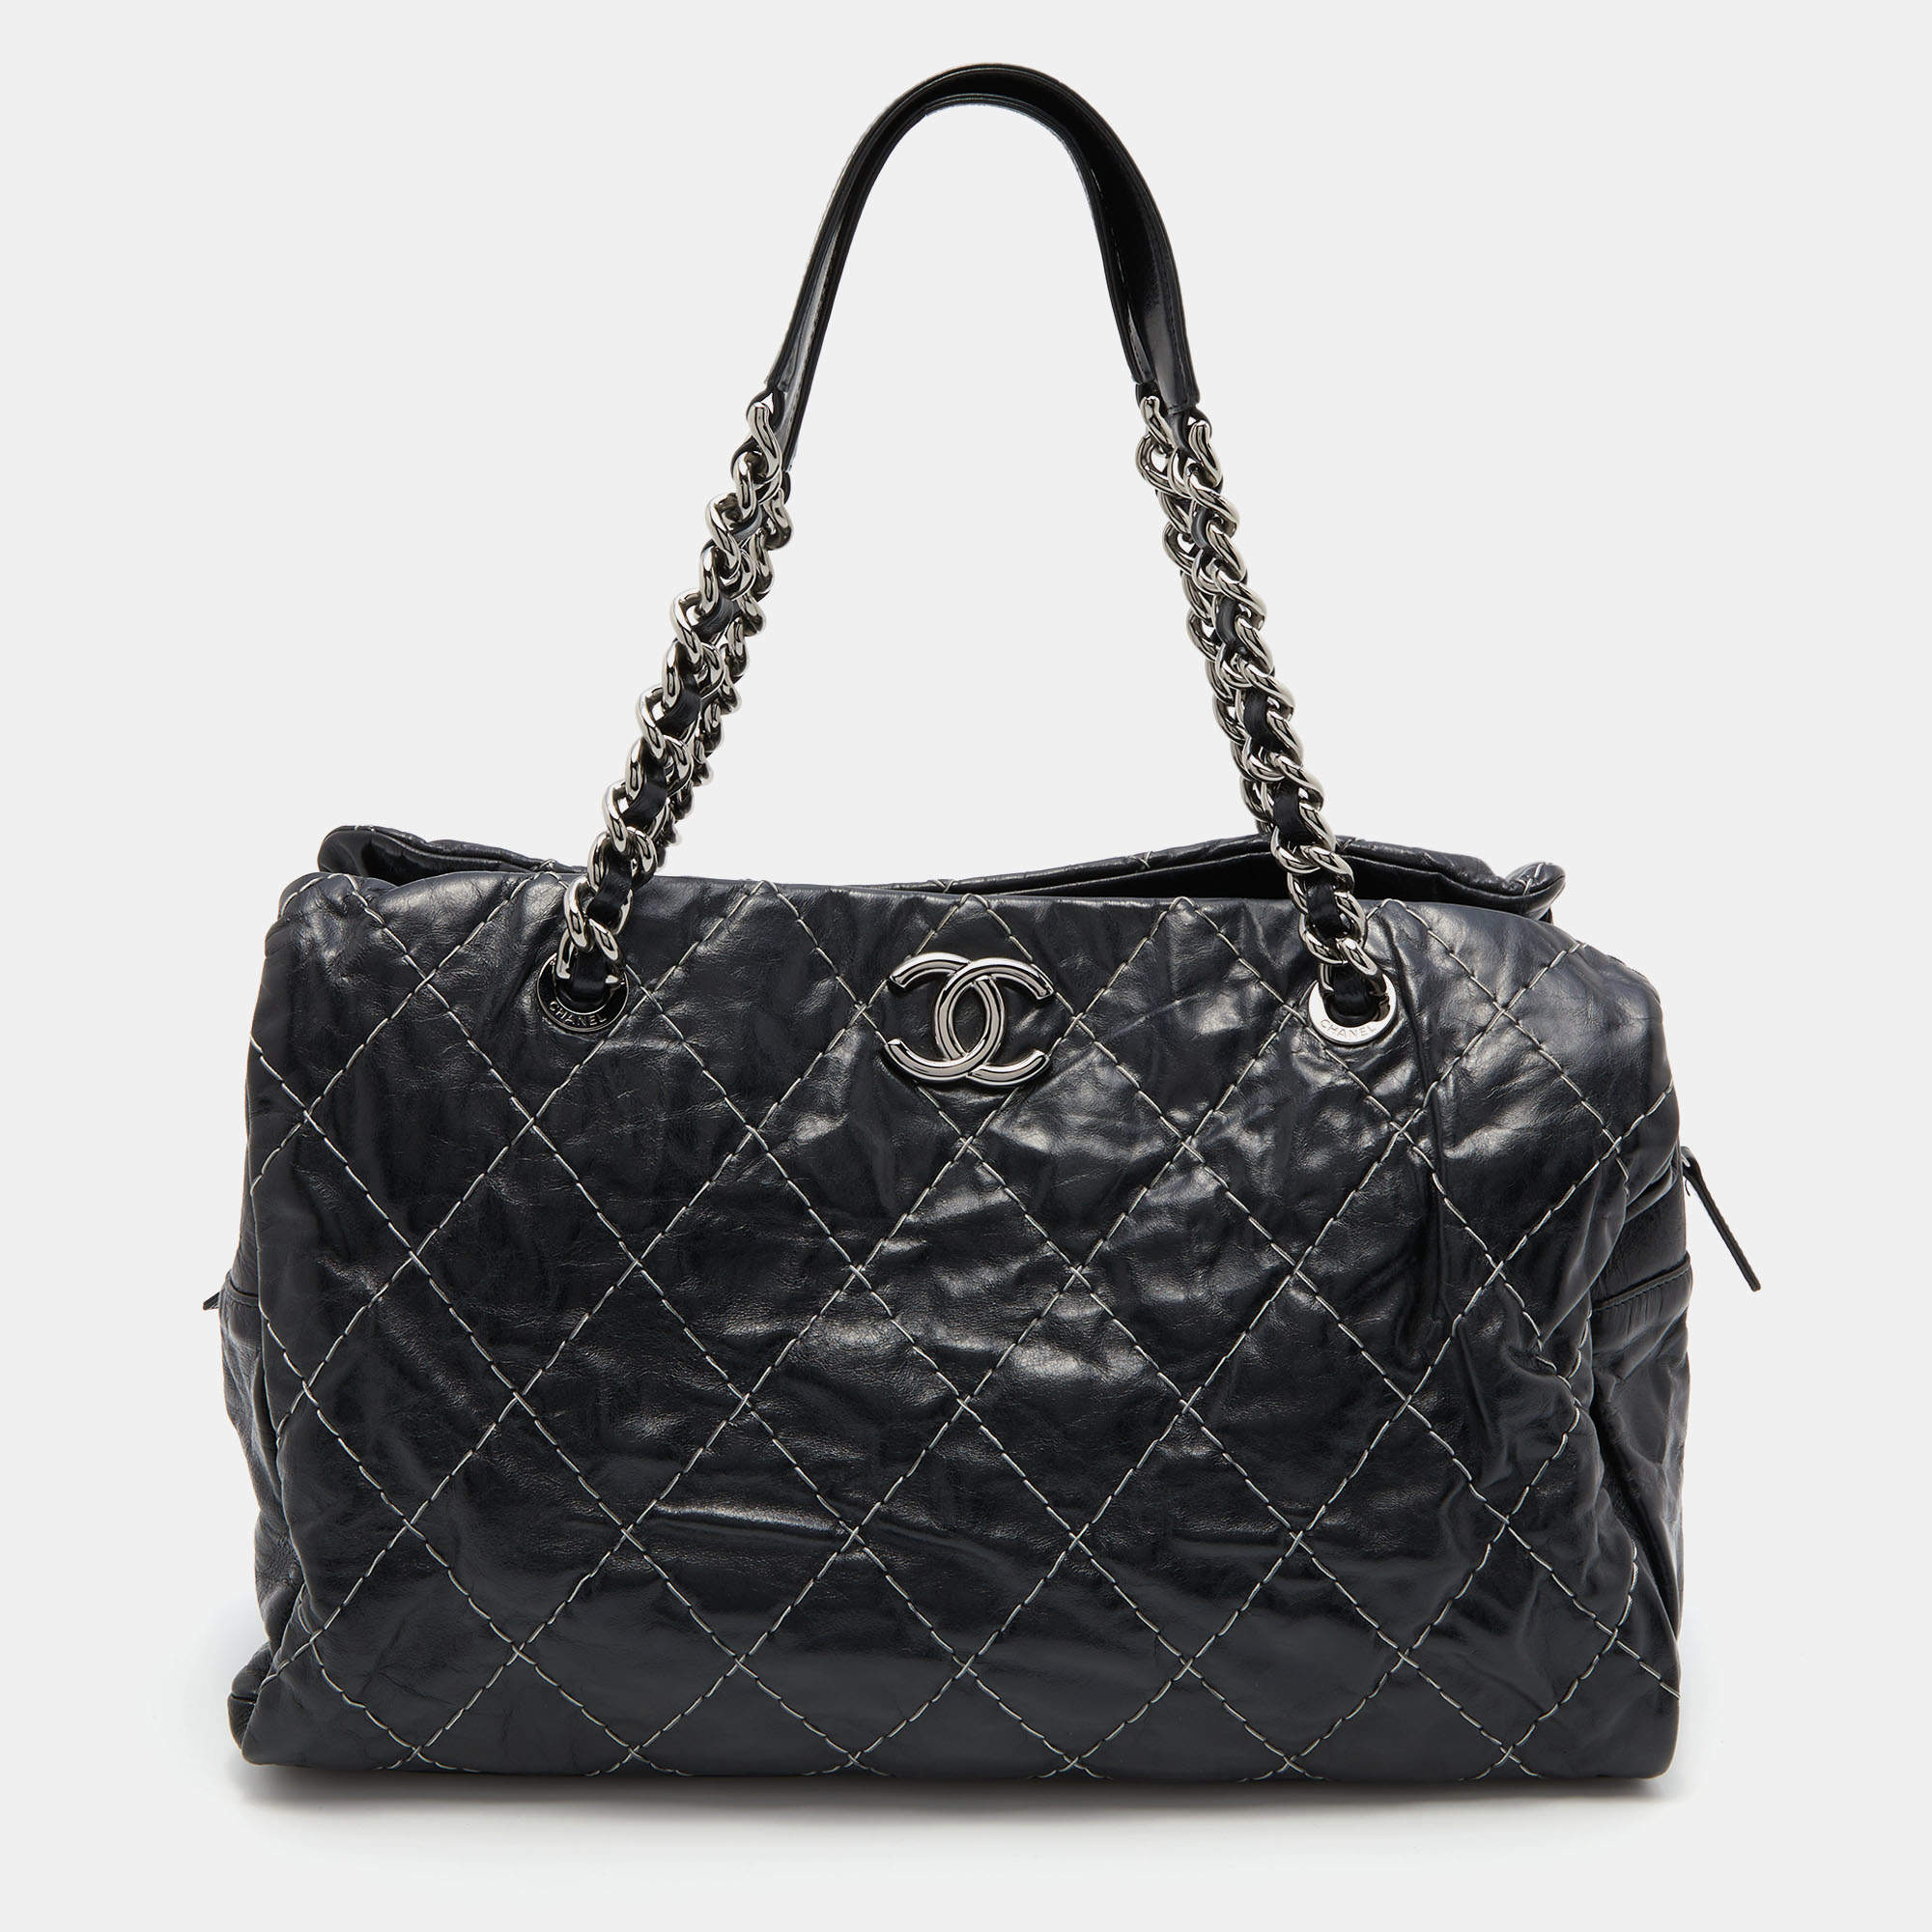 Chanel Black Distressed Leather CC Chain Bag Chanel